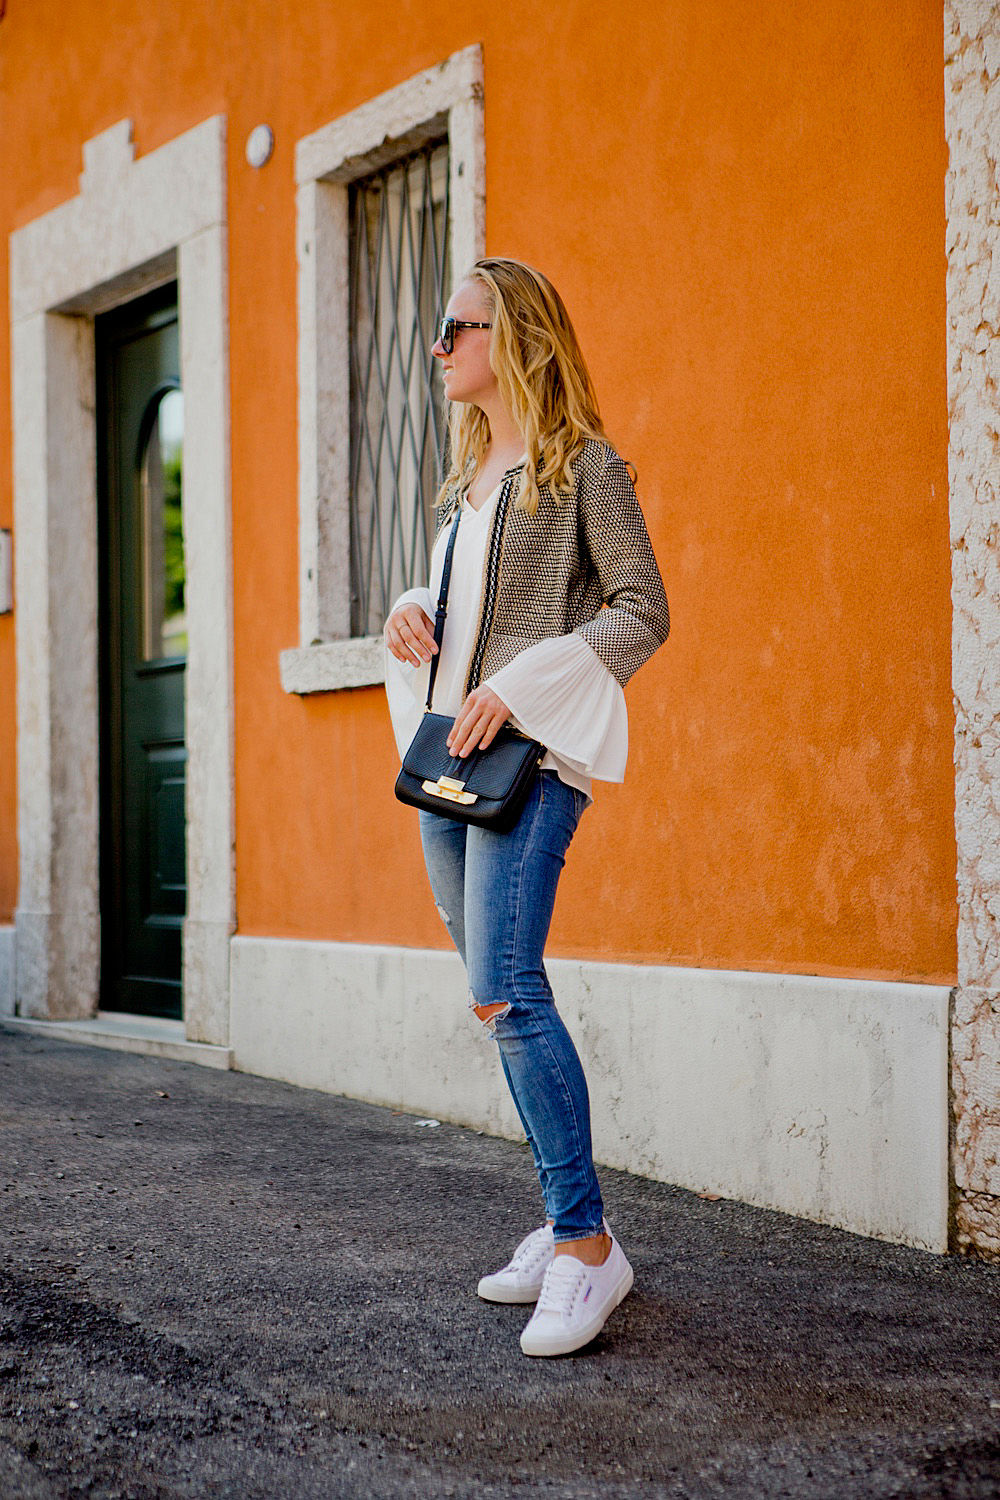 Transition into fall | autumn look inspiration - More & More Bouclé Jacket, white blouse, jeans, Superga